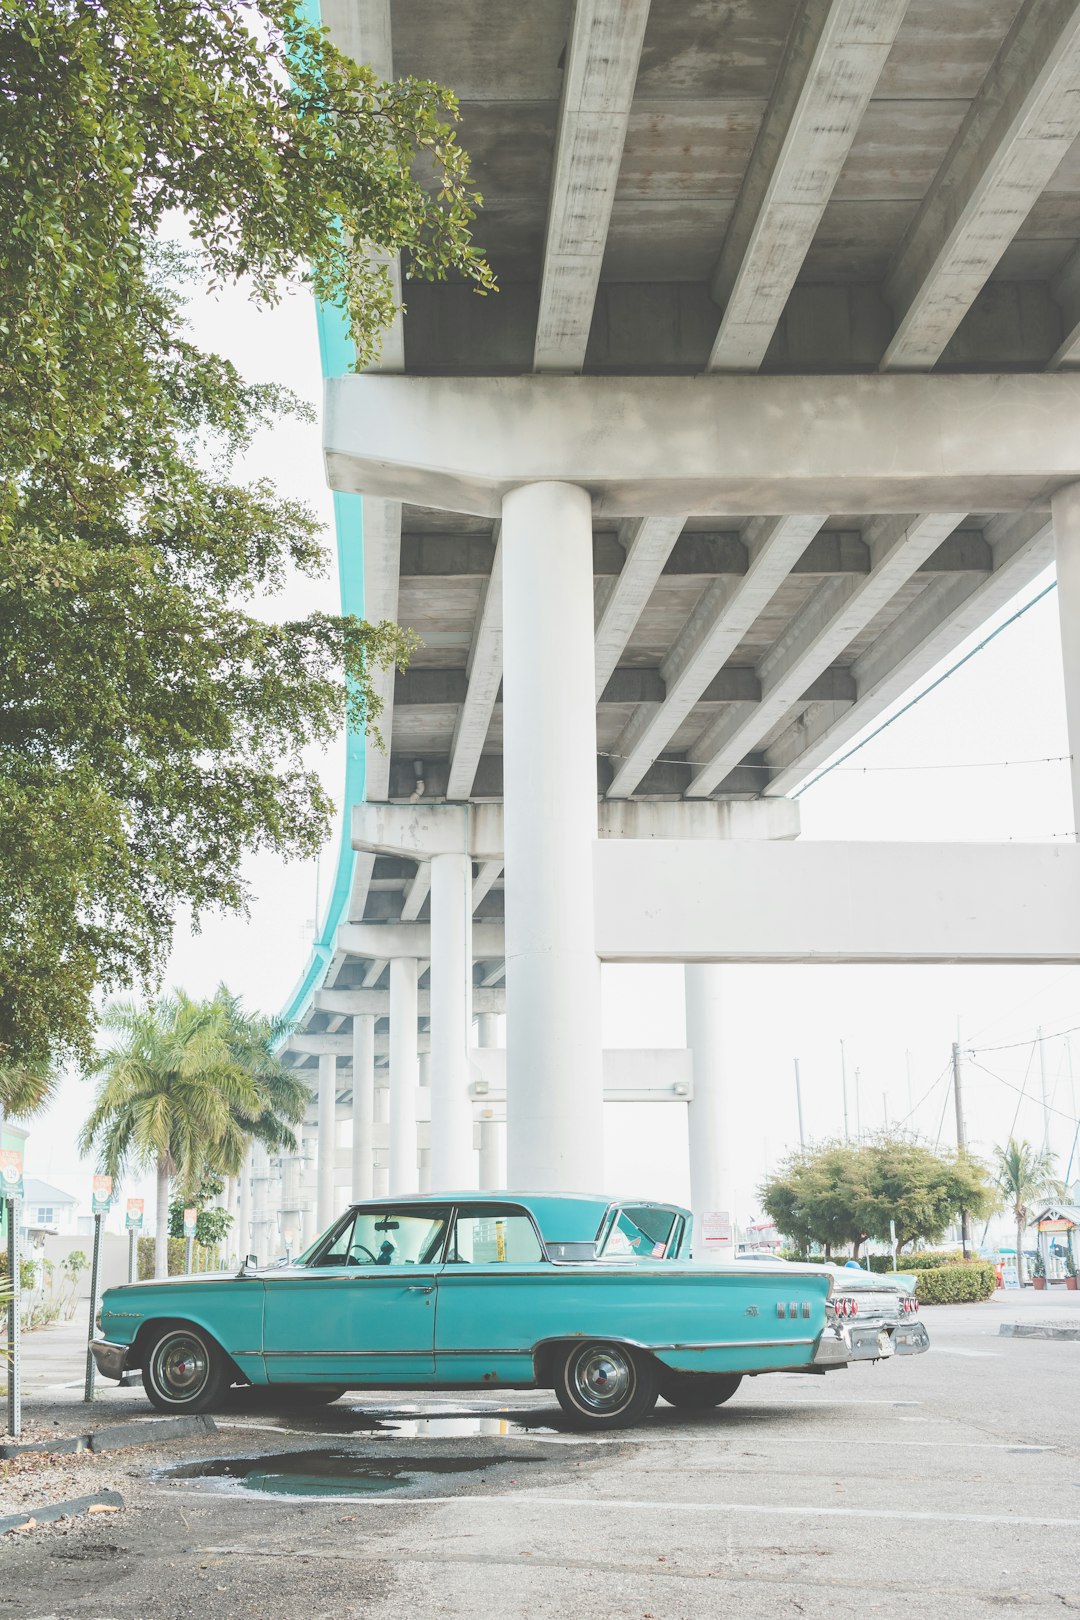 classic teal Chevrolet Impala hardtop coupe parked near tree under flyover during daytime